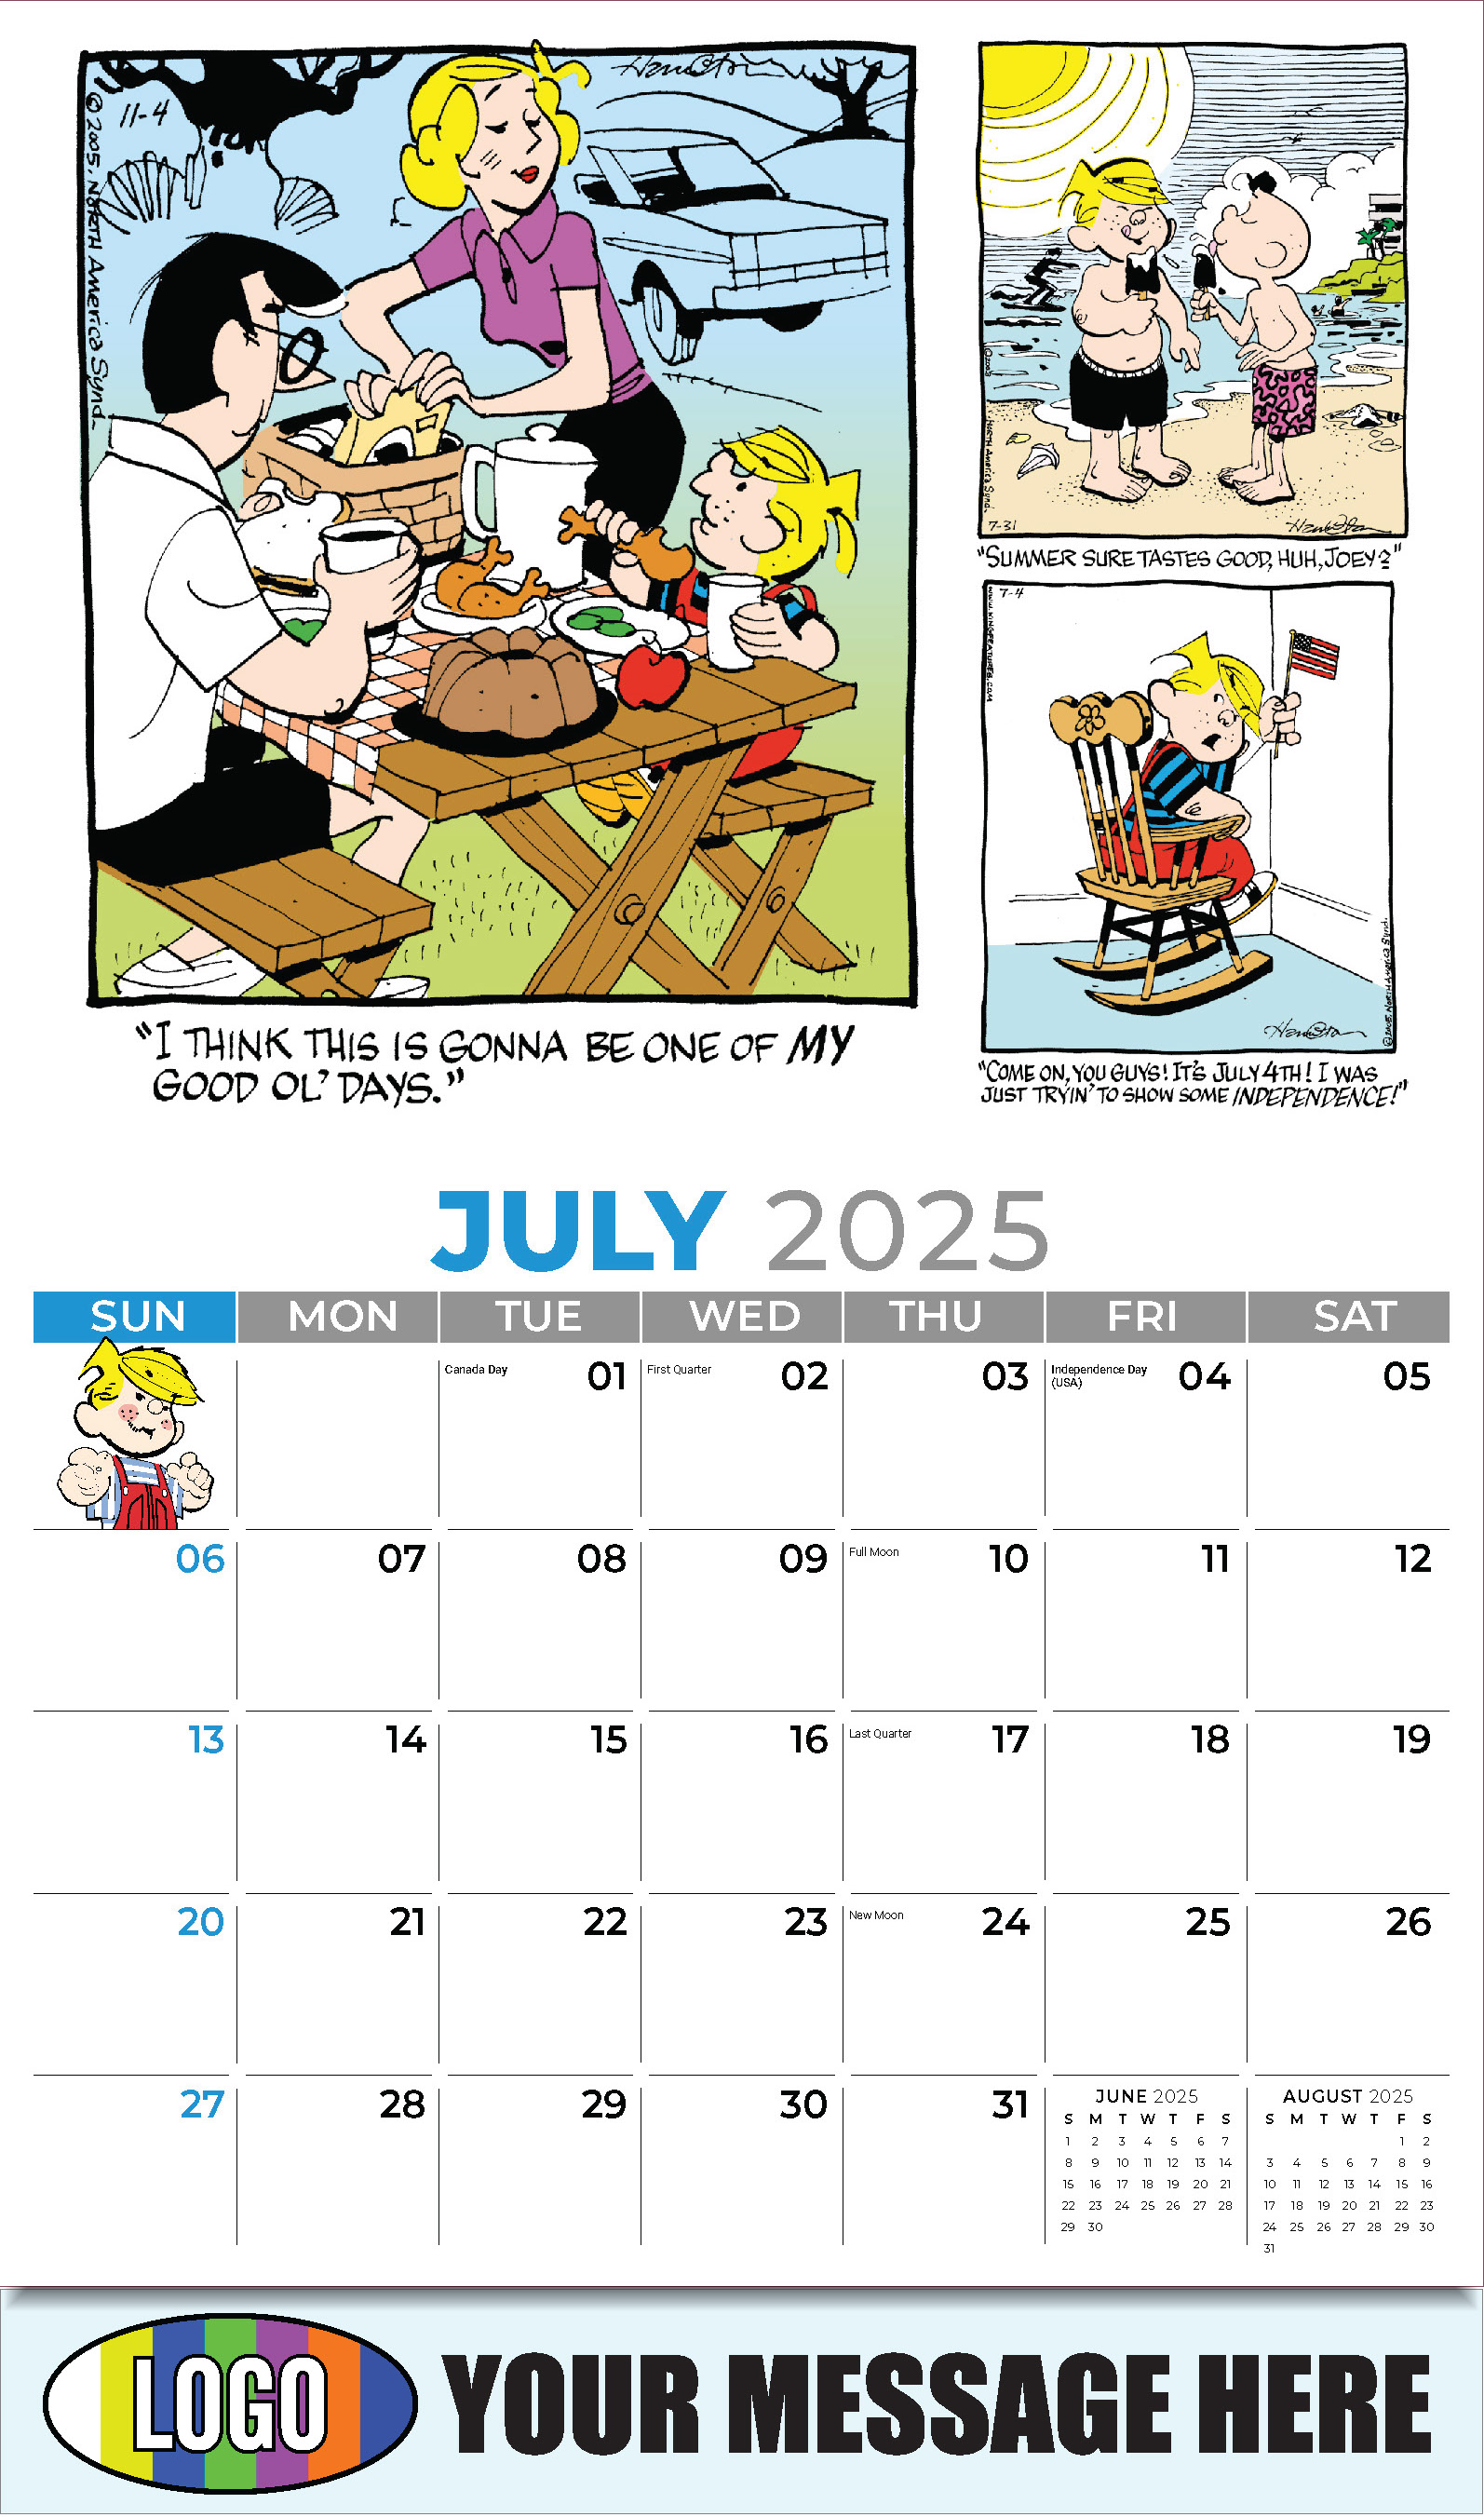 Dennis the Menace 2025 Business Promotional Wall Calendar - July